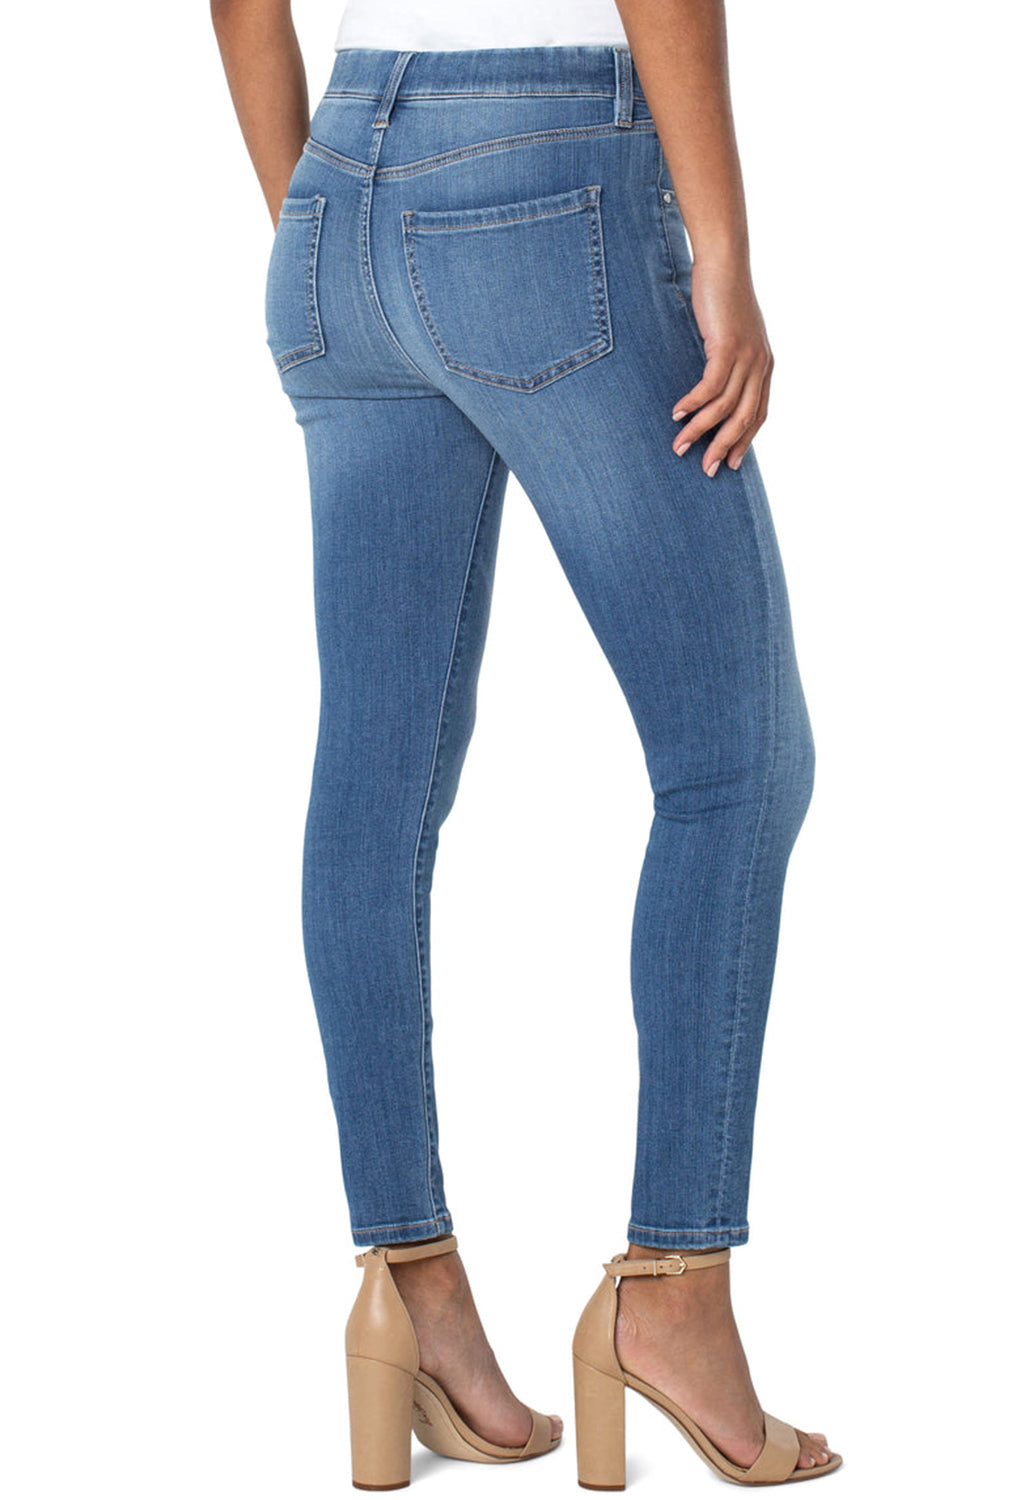 GIA GLIDER ANKLE SKINNY IN CALERA *RECOMMEND GO 1 SIZE DOWN*